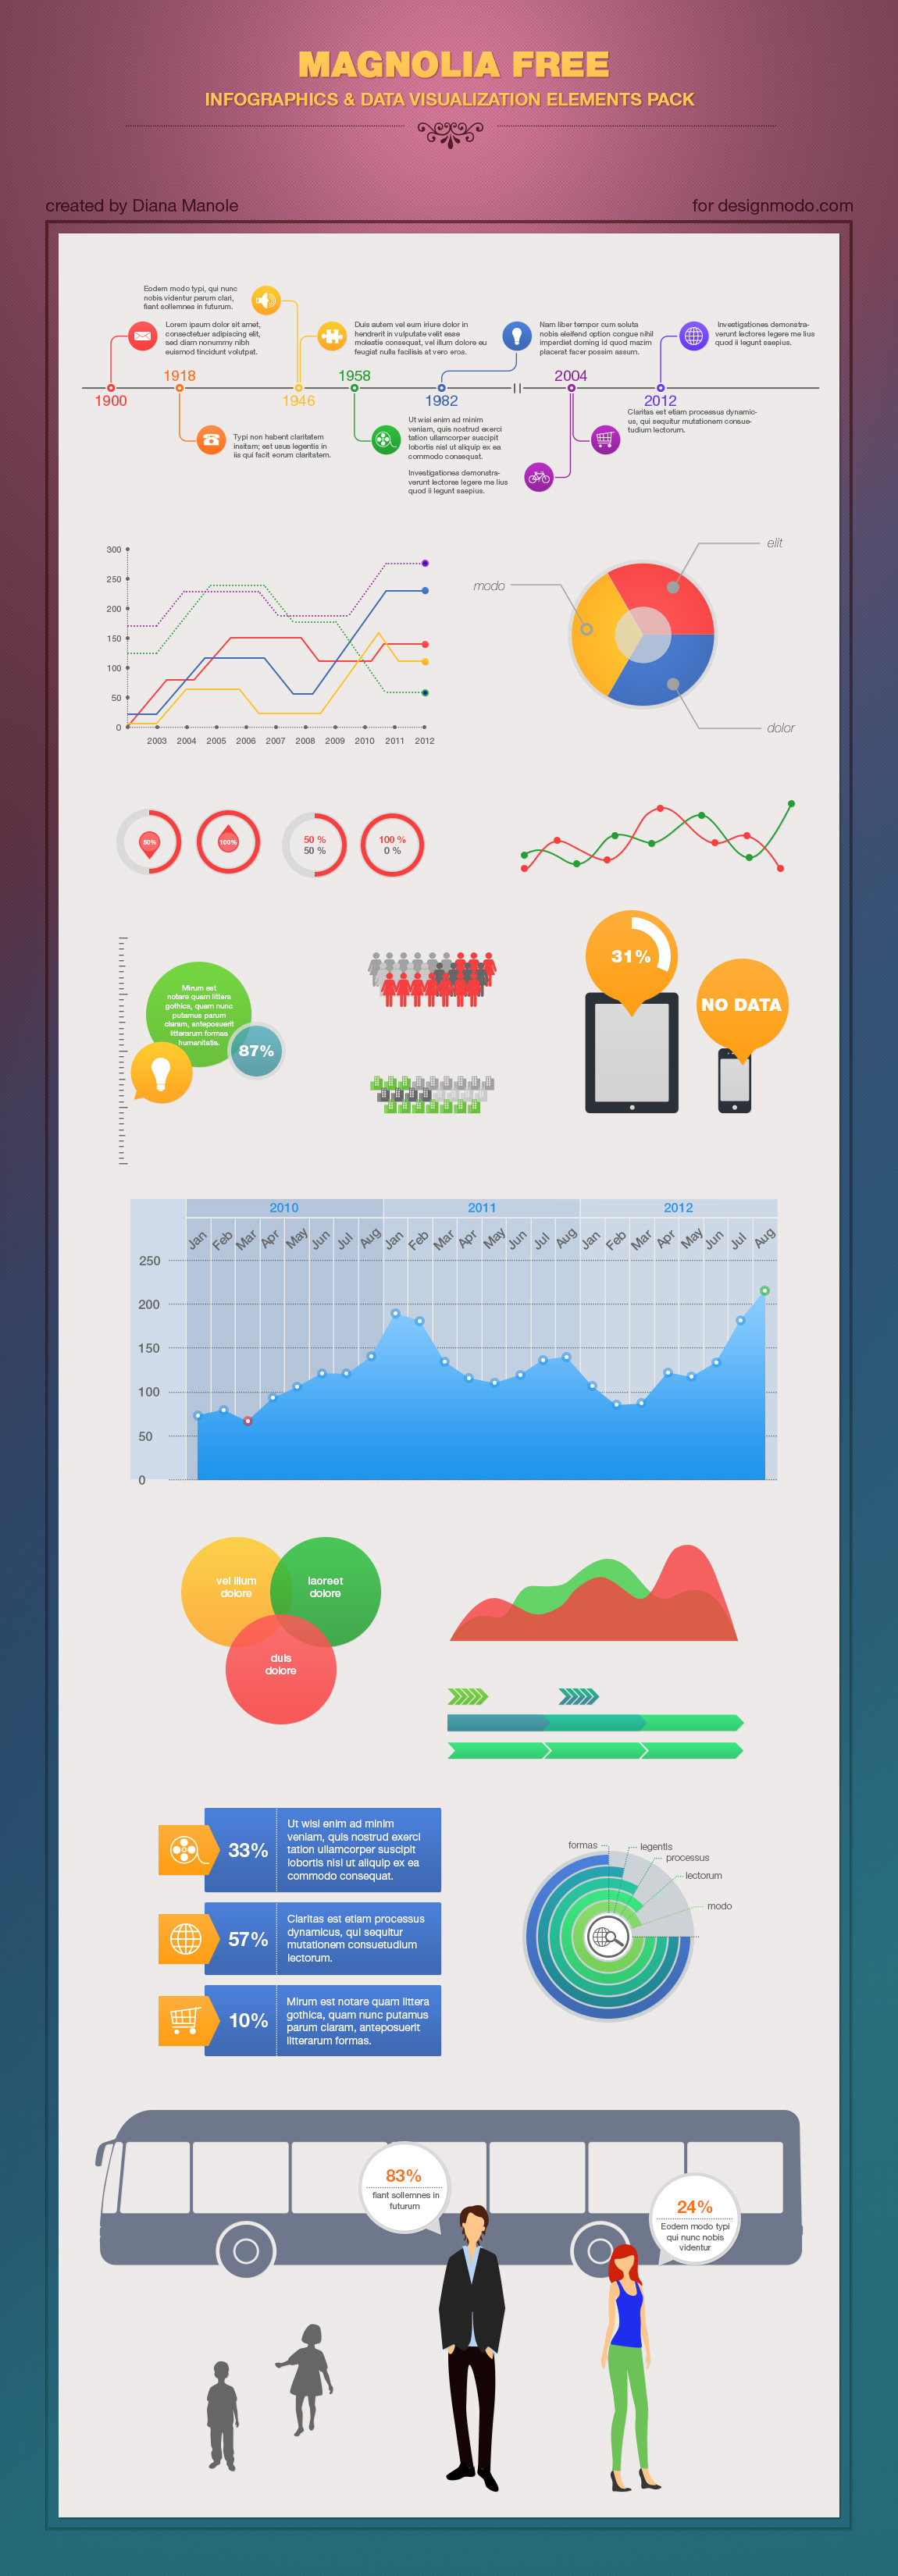 14 Free Infographic Template PSD Images